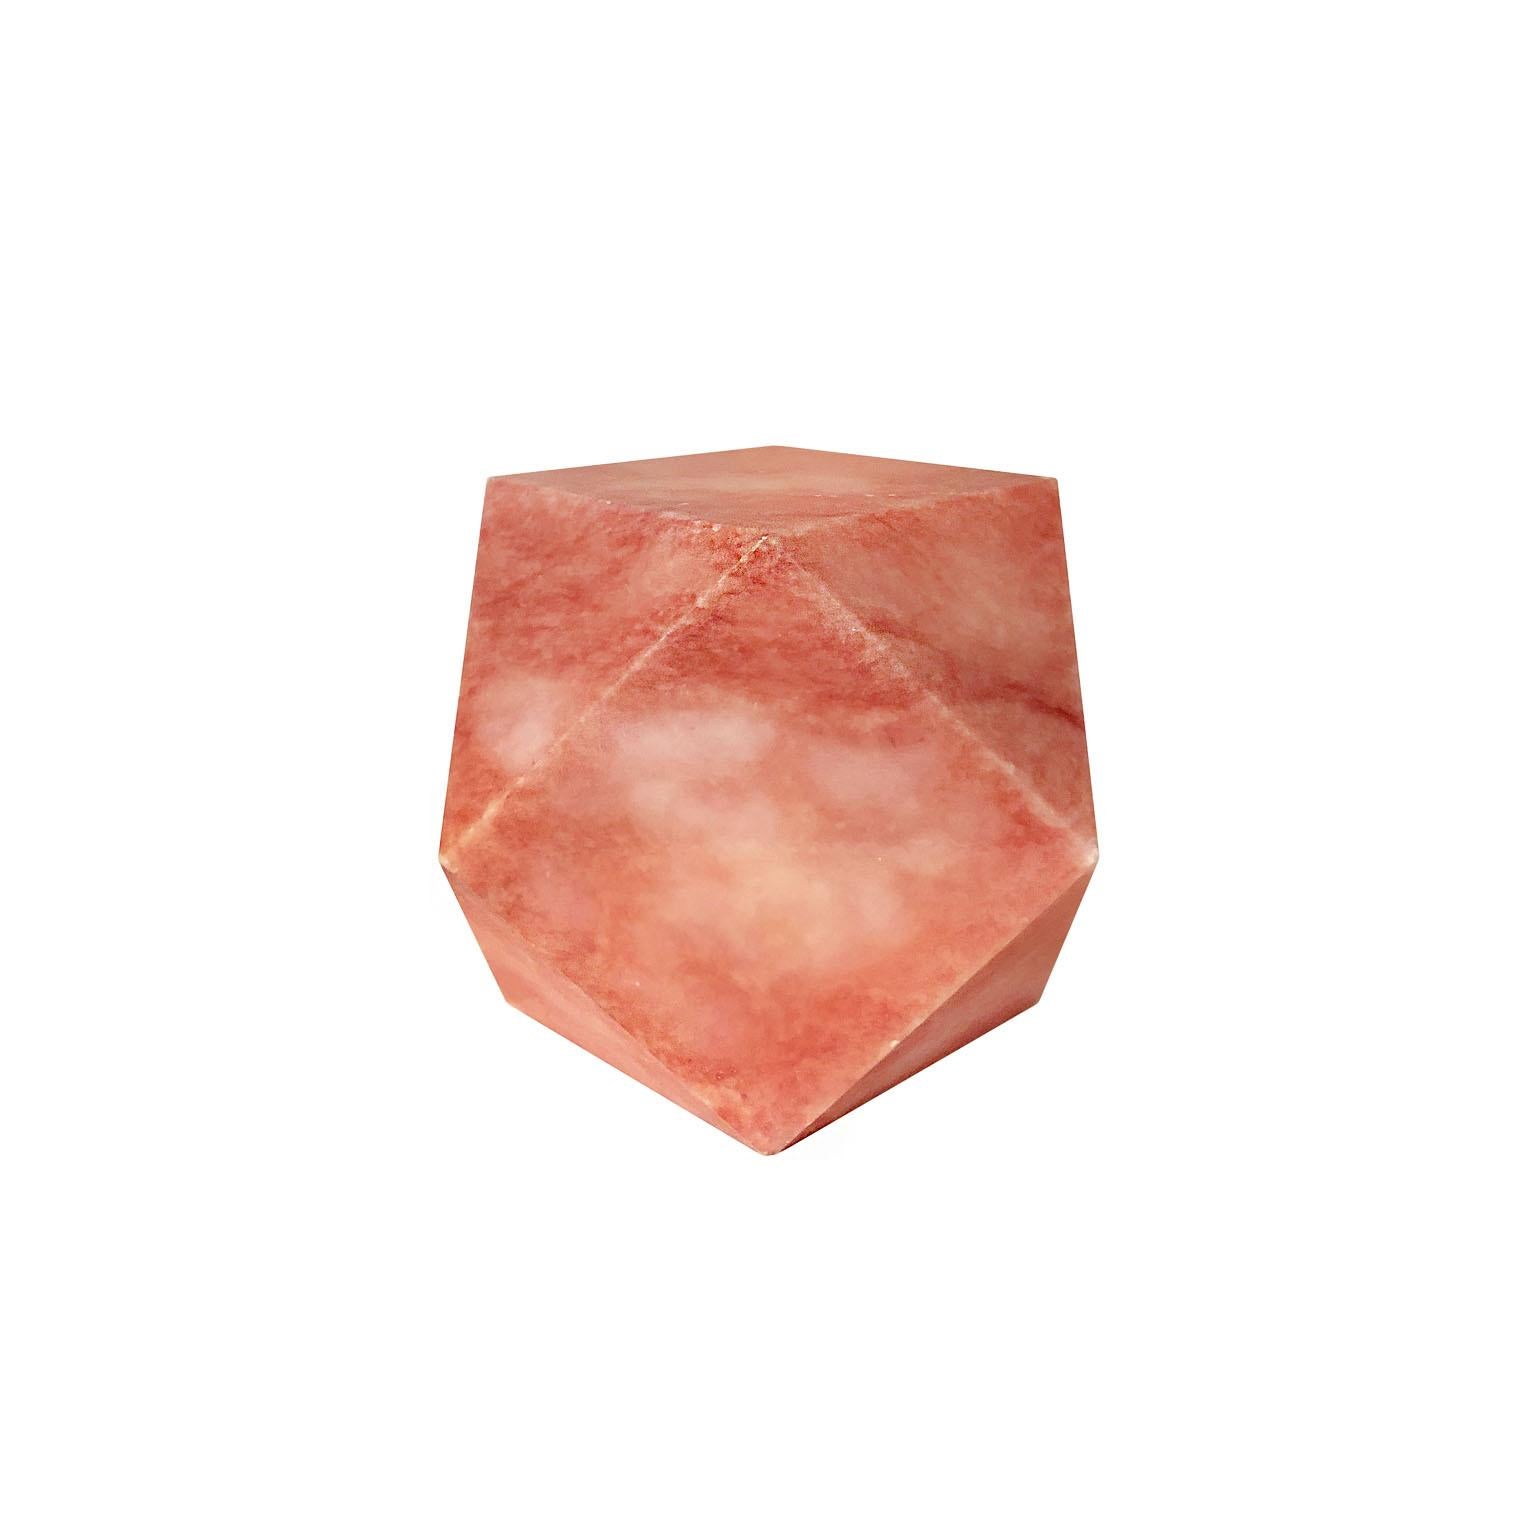 Vintage coral-toned marble faceted cube sculpture, Italy, 1970s. 

Pair available, priced individually.